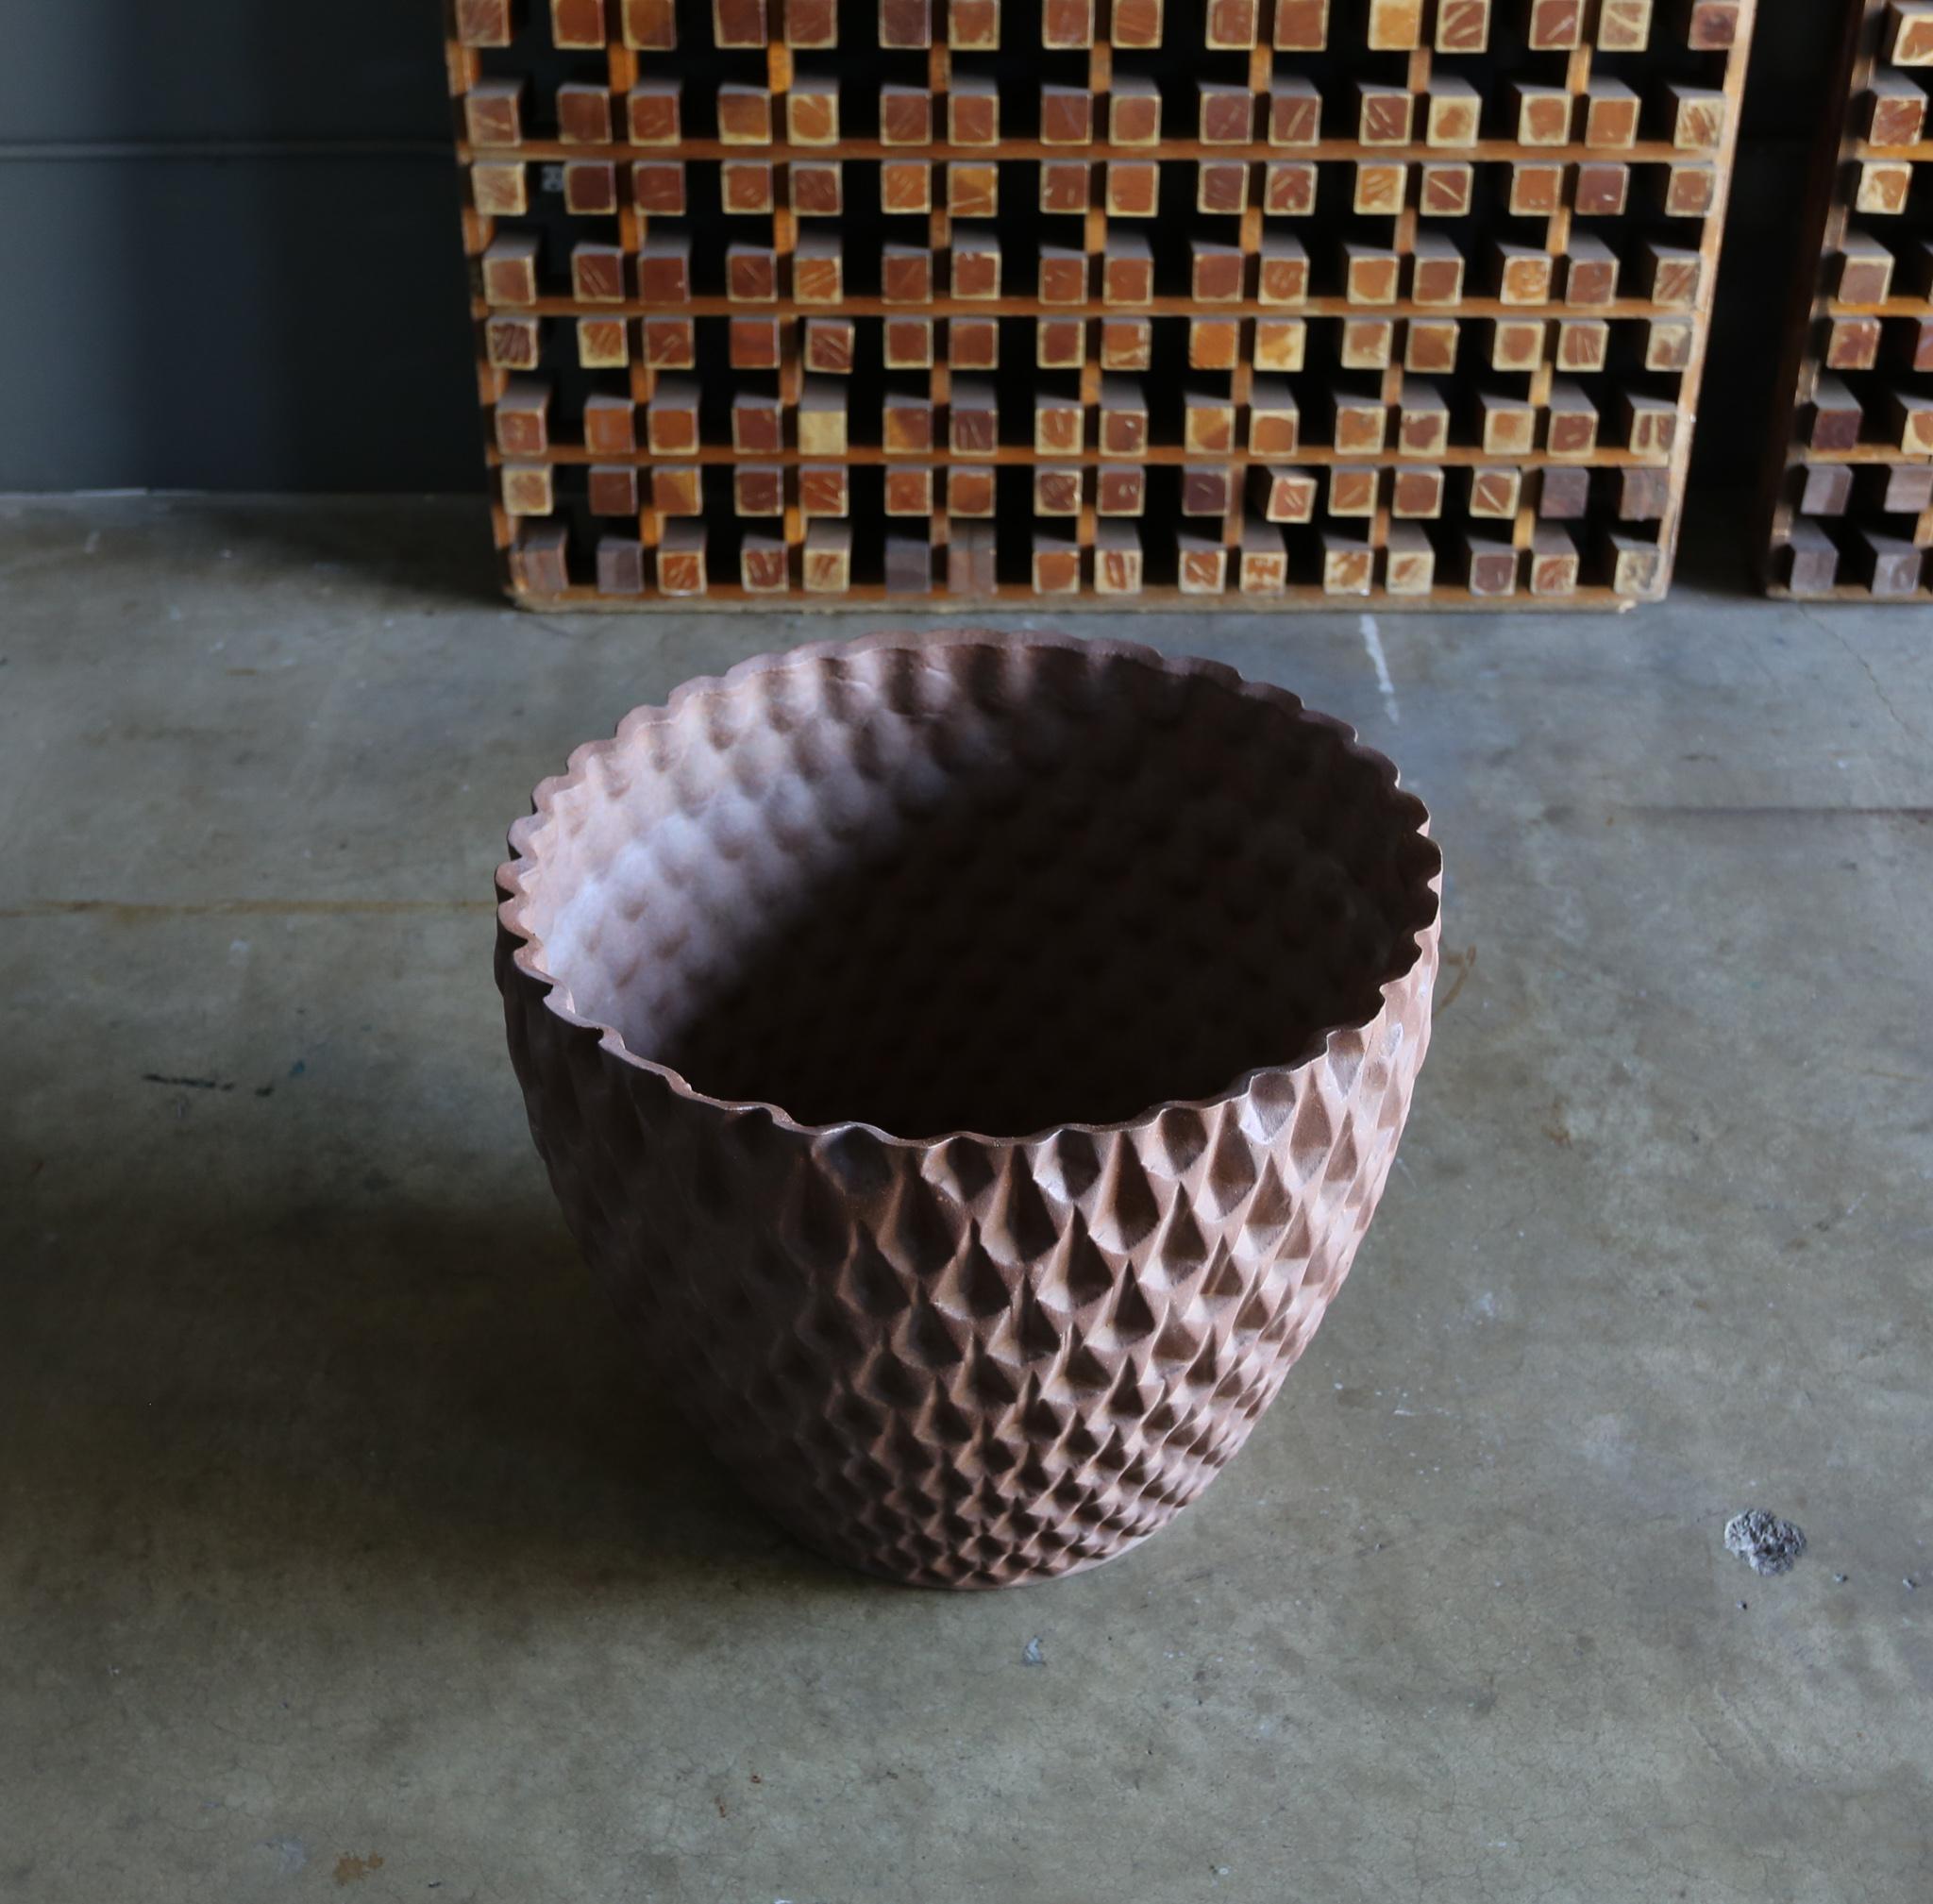 David Cressey Phoenix planter. This design is part of the Pro/Artisan stoneware collection for Architectural Pottery. circa 1965.